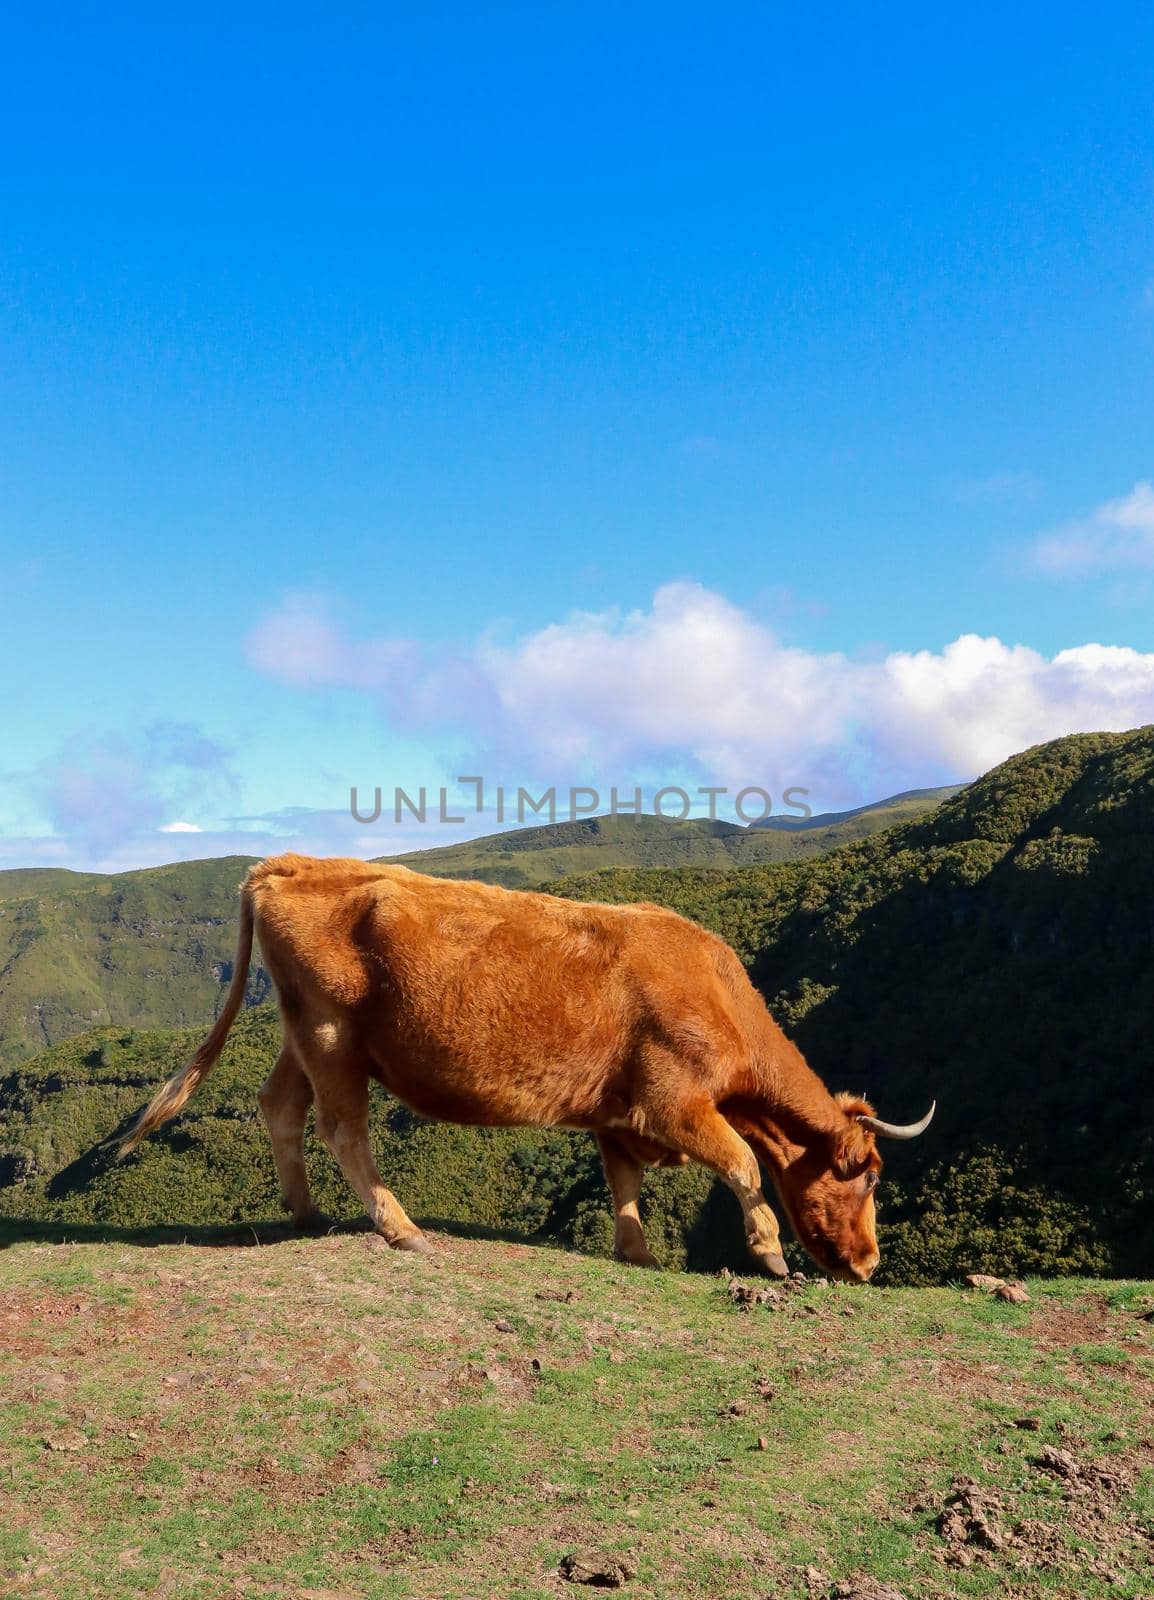 Cow grazing on the grassy edge of a mountain, Madeira, Portugal. by olifrenchphoto